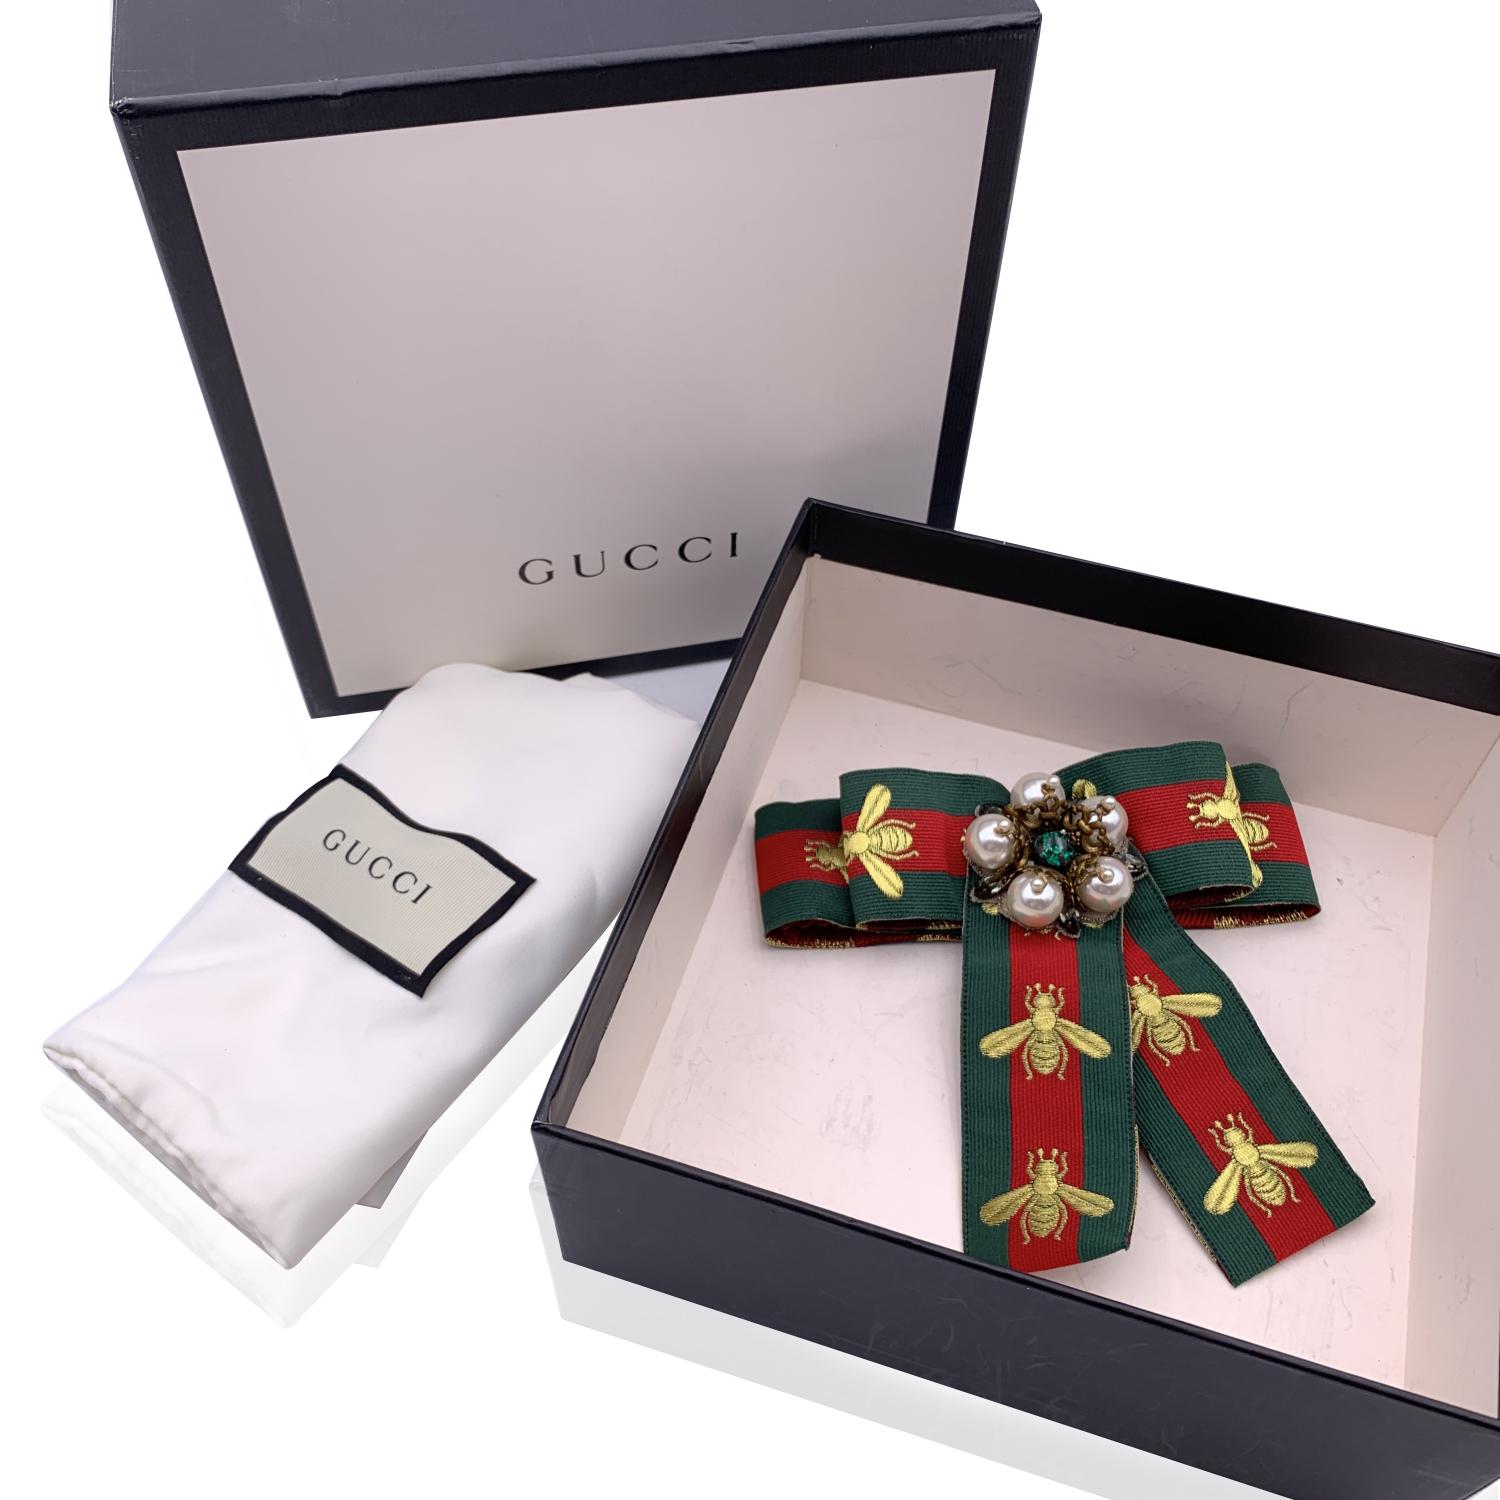 Beautiful Gucci green/red/green striped grosgrain bow brooch with embroidered bee. Pearls and rhinestones embellishment on the front.Safety pin closure on the back. Approx. width: 5.5 inches - 14 cm. Approx. height: 5.5 inches - 14 cm. Signed